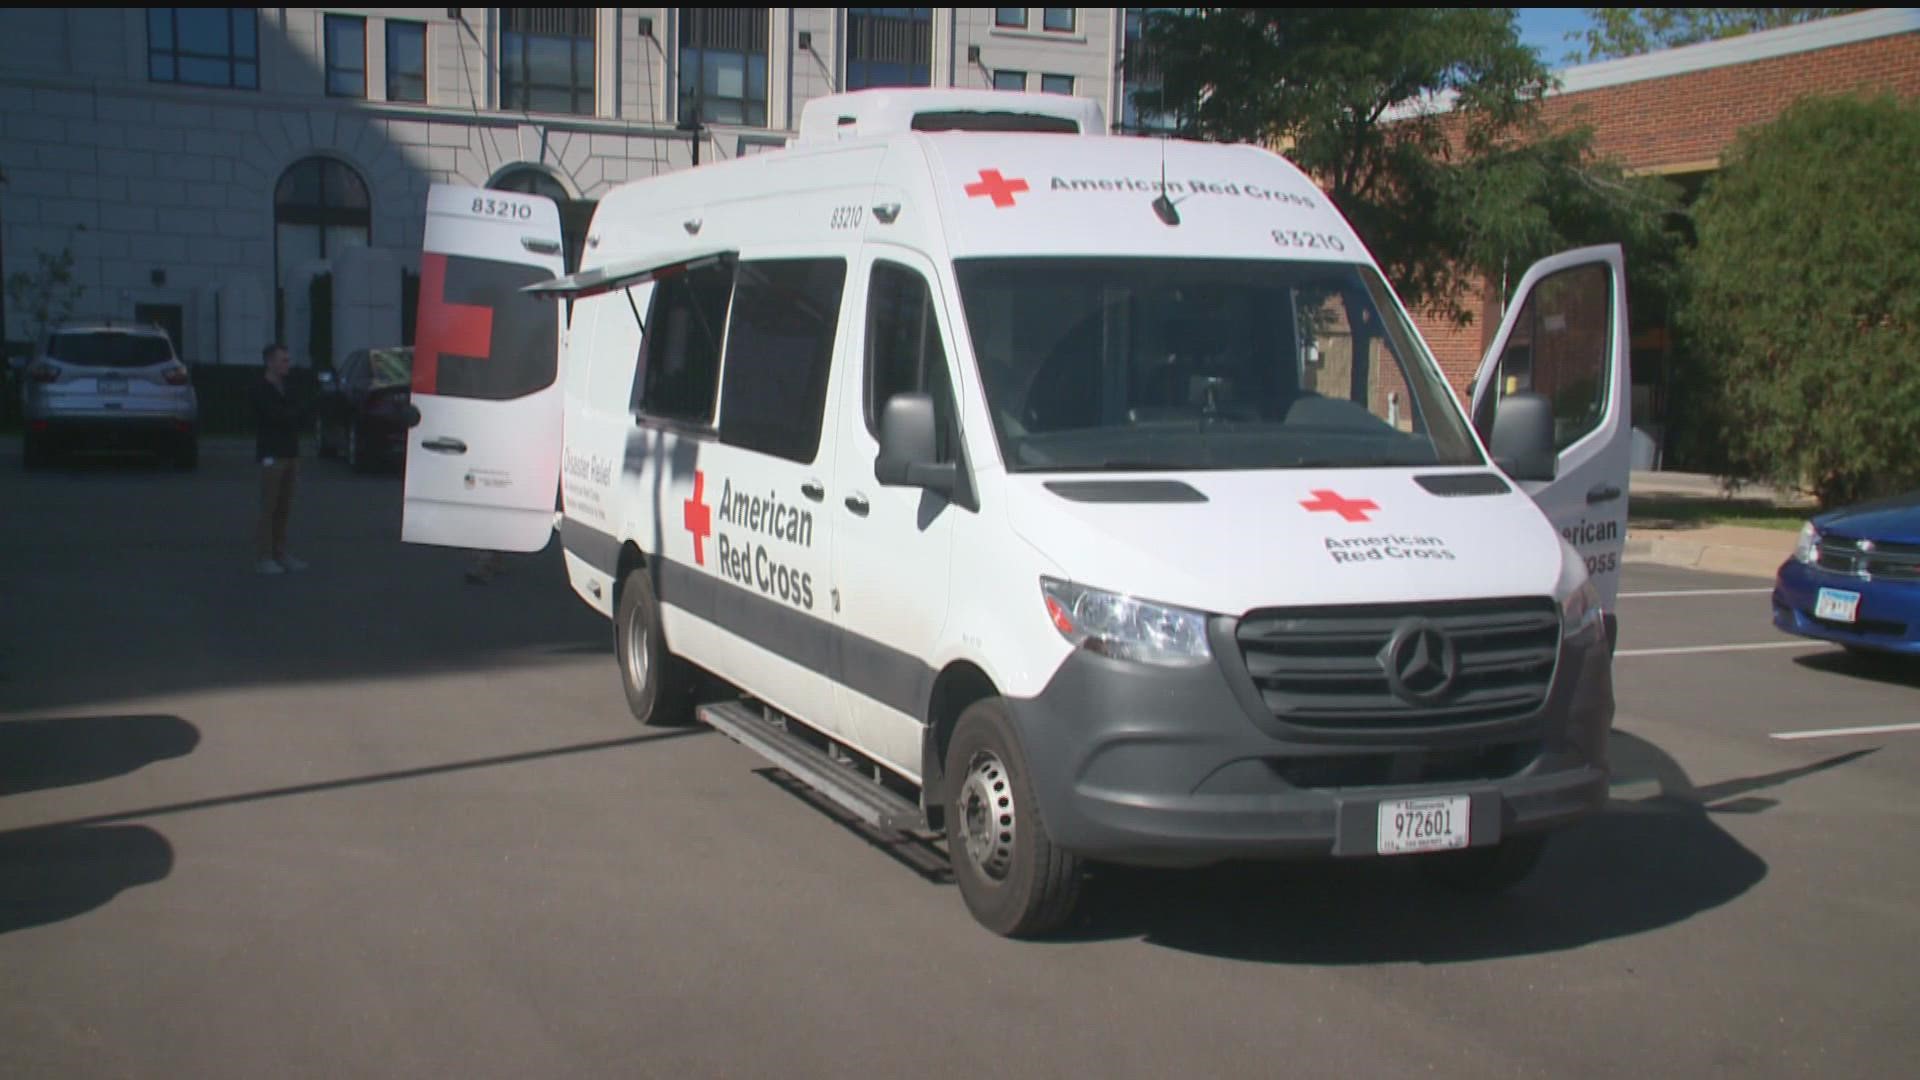 The emergency response vehicle can store up to 600 meals to hand out to people in need.